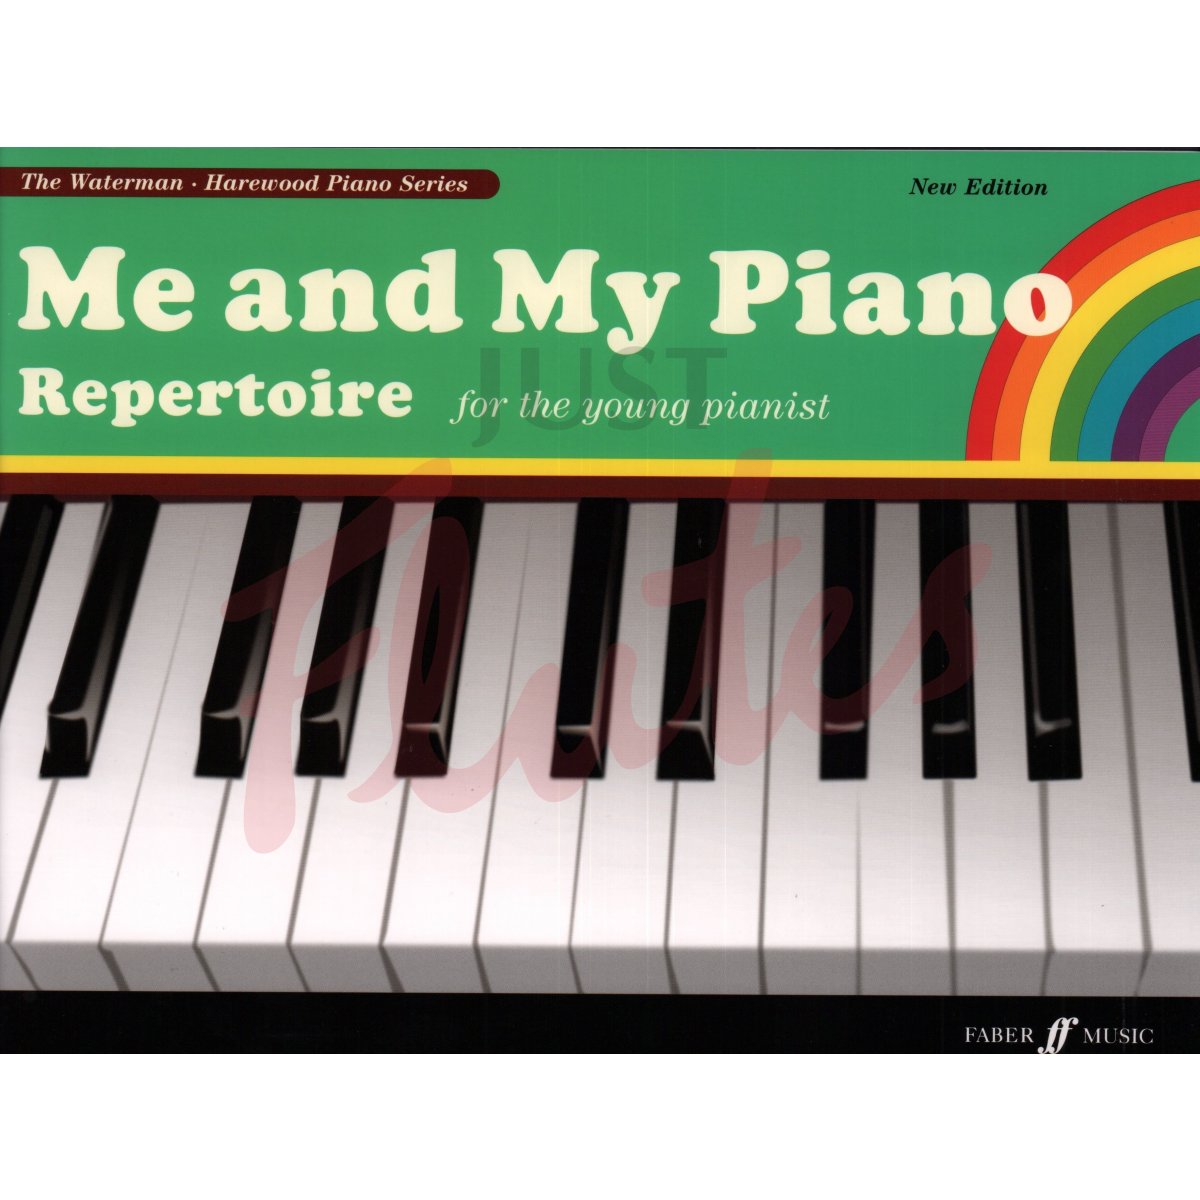 Me and My Piano: Repertoire